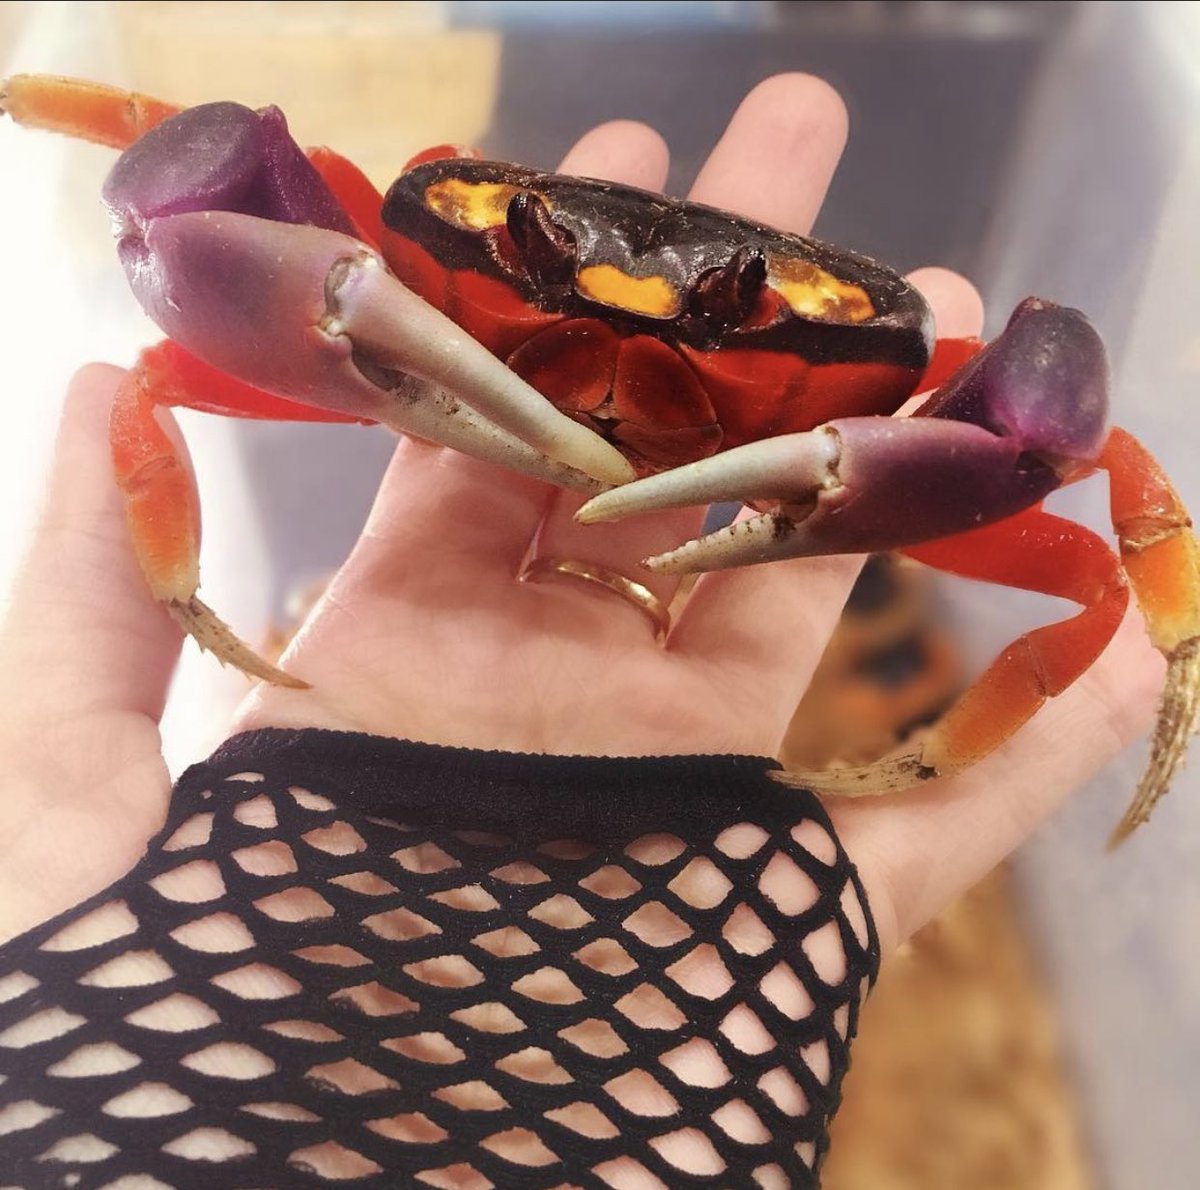 Krabby!Aka Picasso, the Halloween crab. He didn’t make it through one of his mounts back in 2018, once again proving that crabs are super delicate no matter how experienced you are, and don’t make good pets